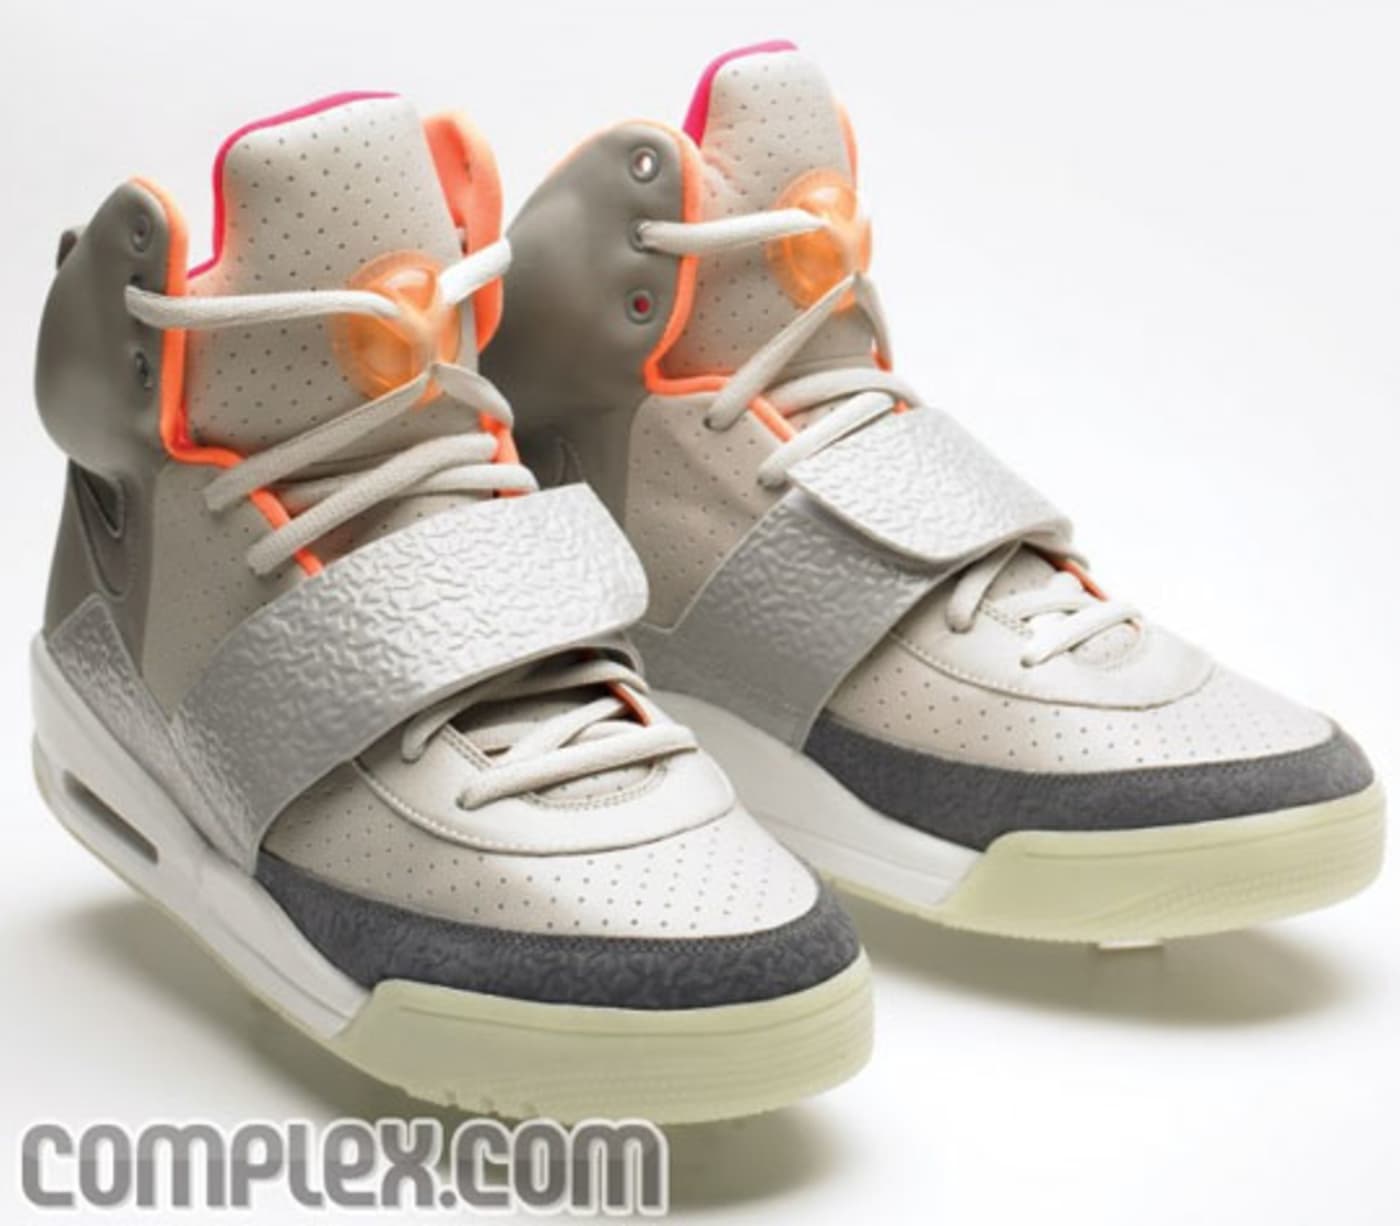 Lógicamente autobús inoxidable How Much Are Nike Air Yeezys Really Selling For on eBay? | Complex